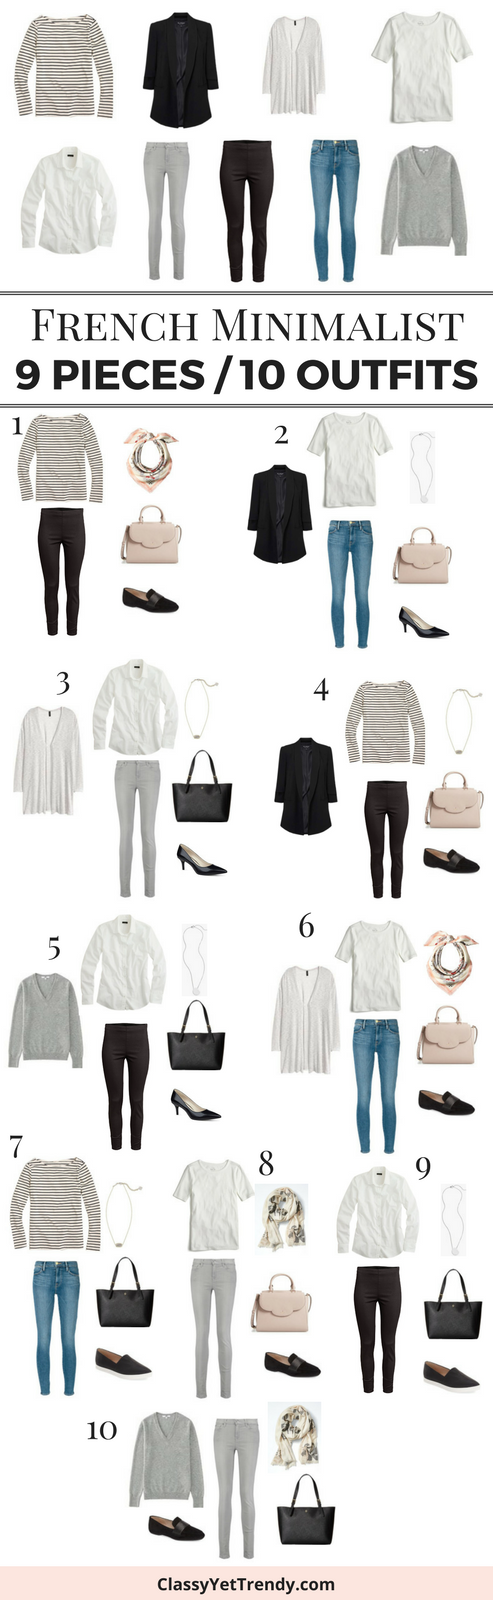 9 Pieces / 10 Outfits (French Minimalist Style)